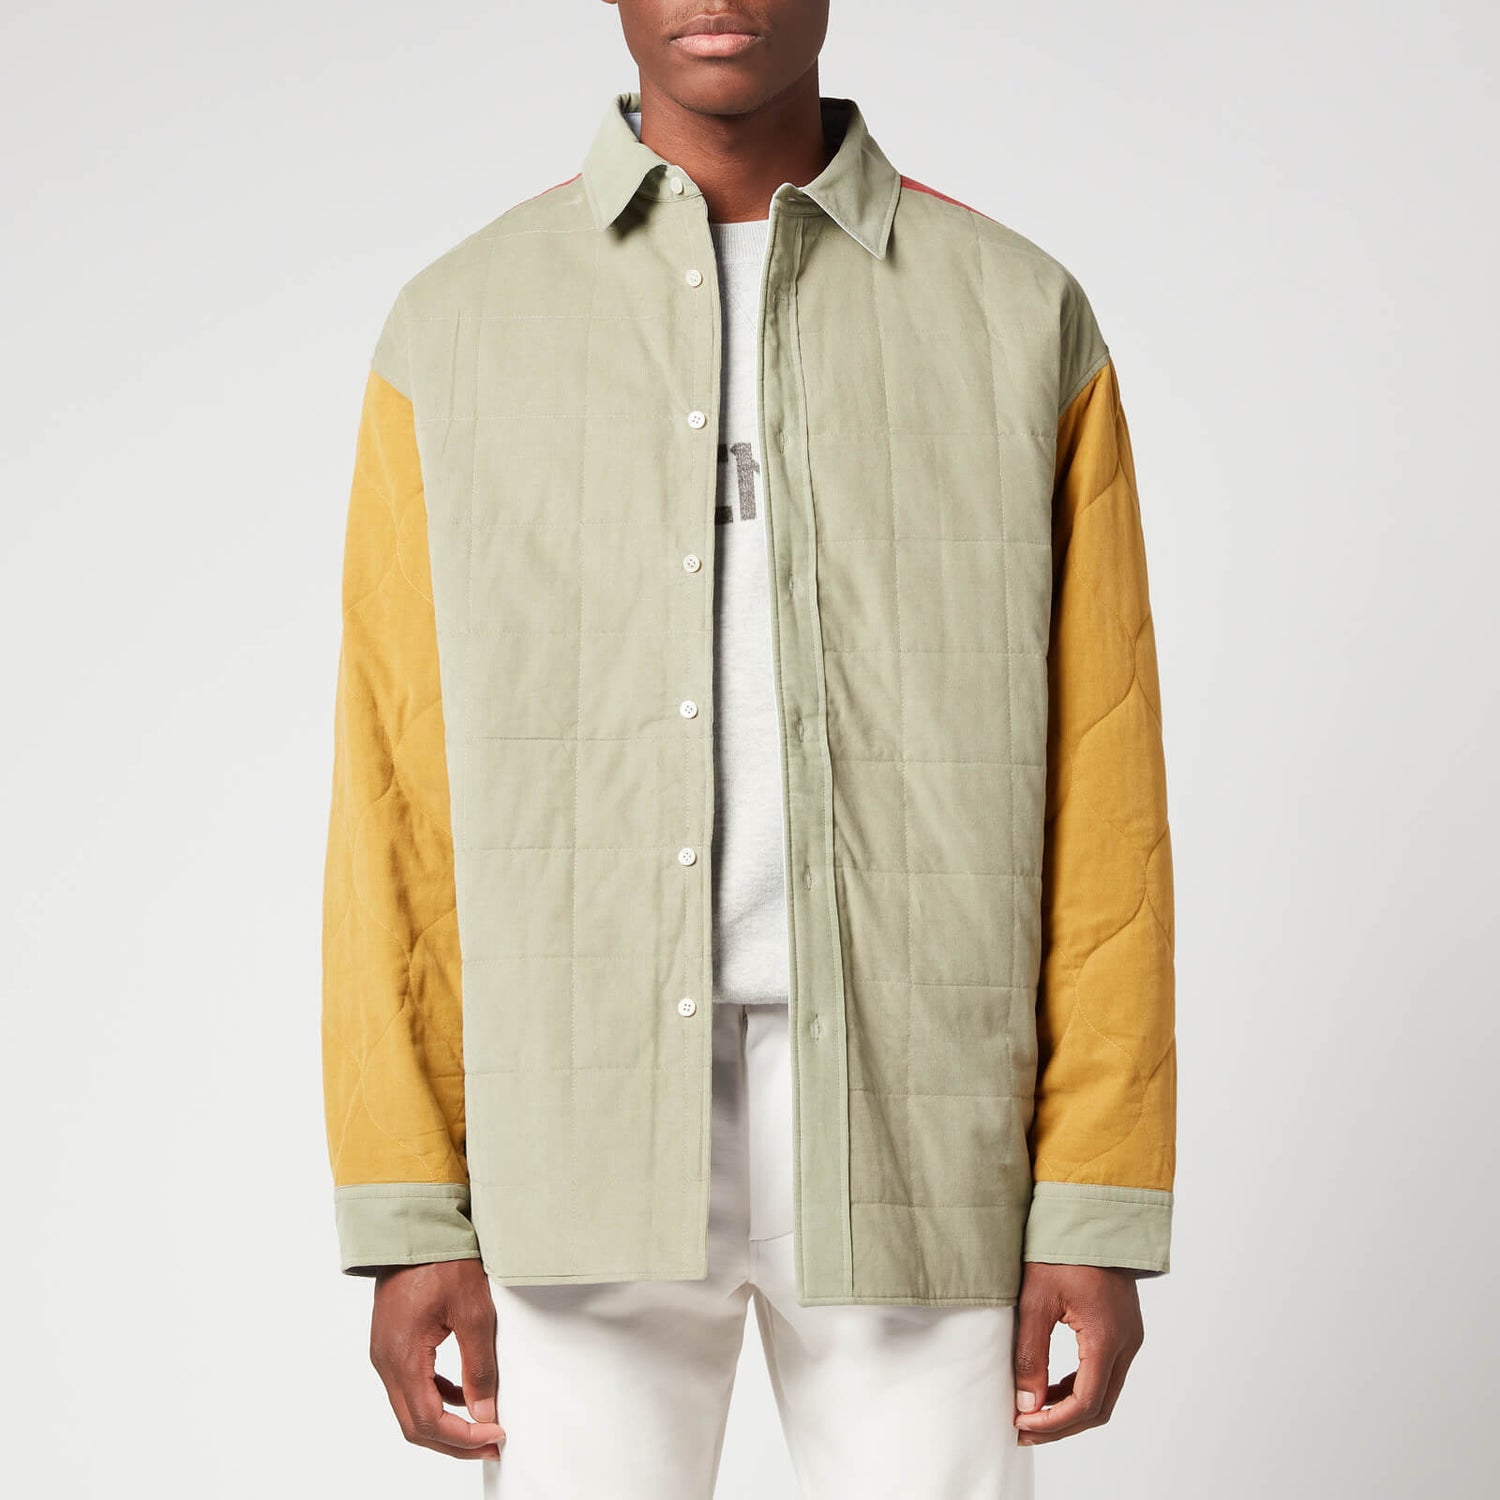 KENZO Men's Reversible Quilted Shirt - Lime Tea - XXL